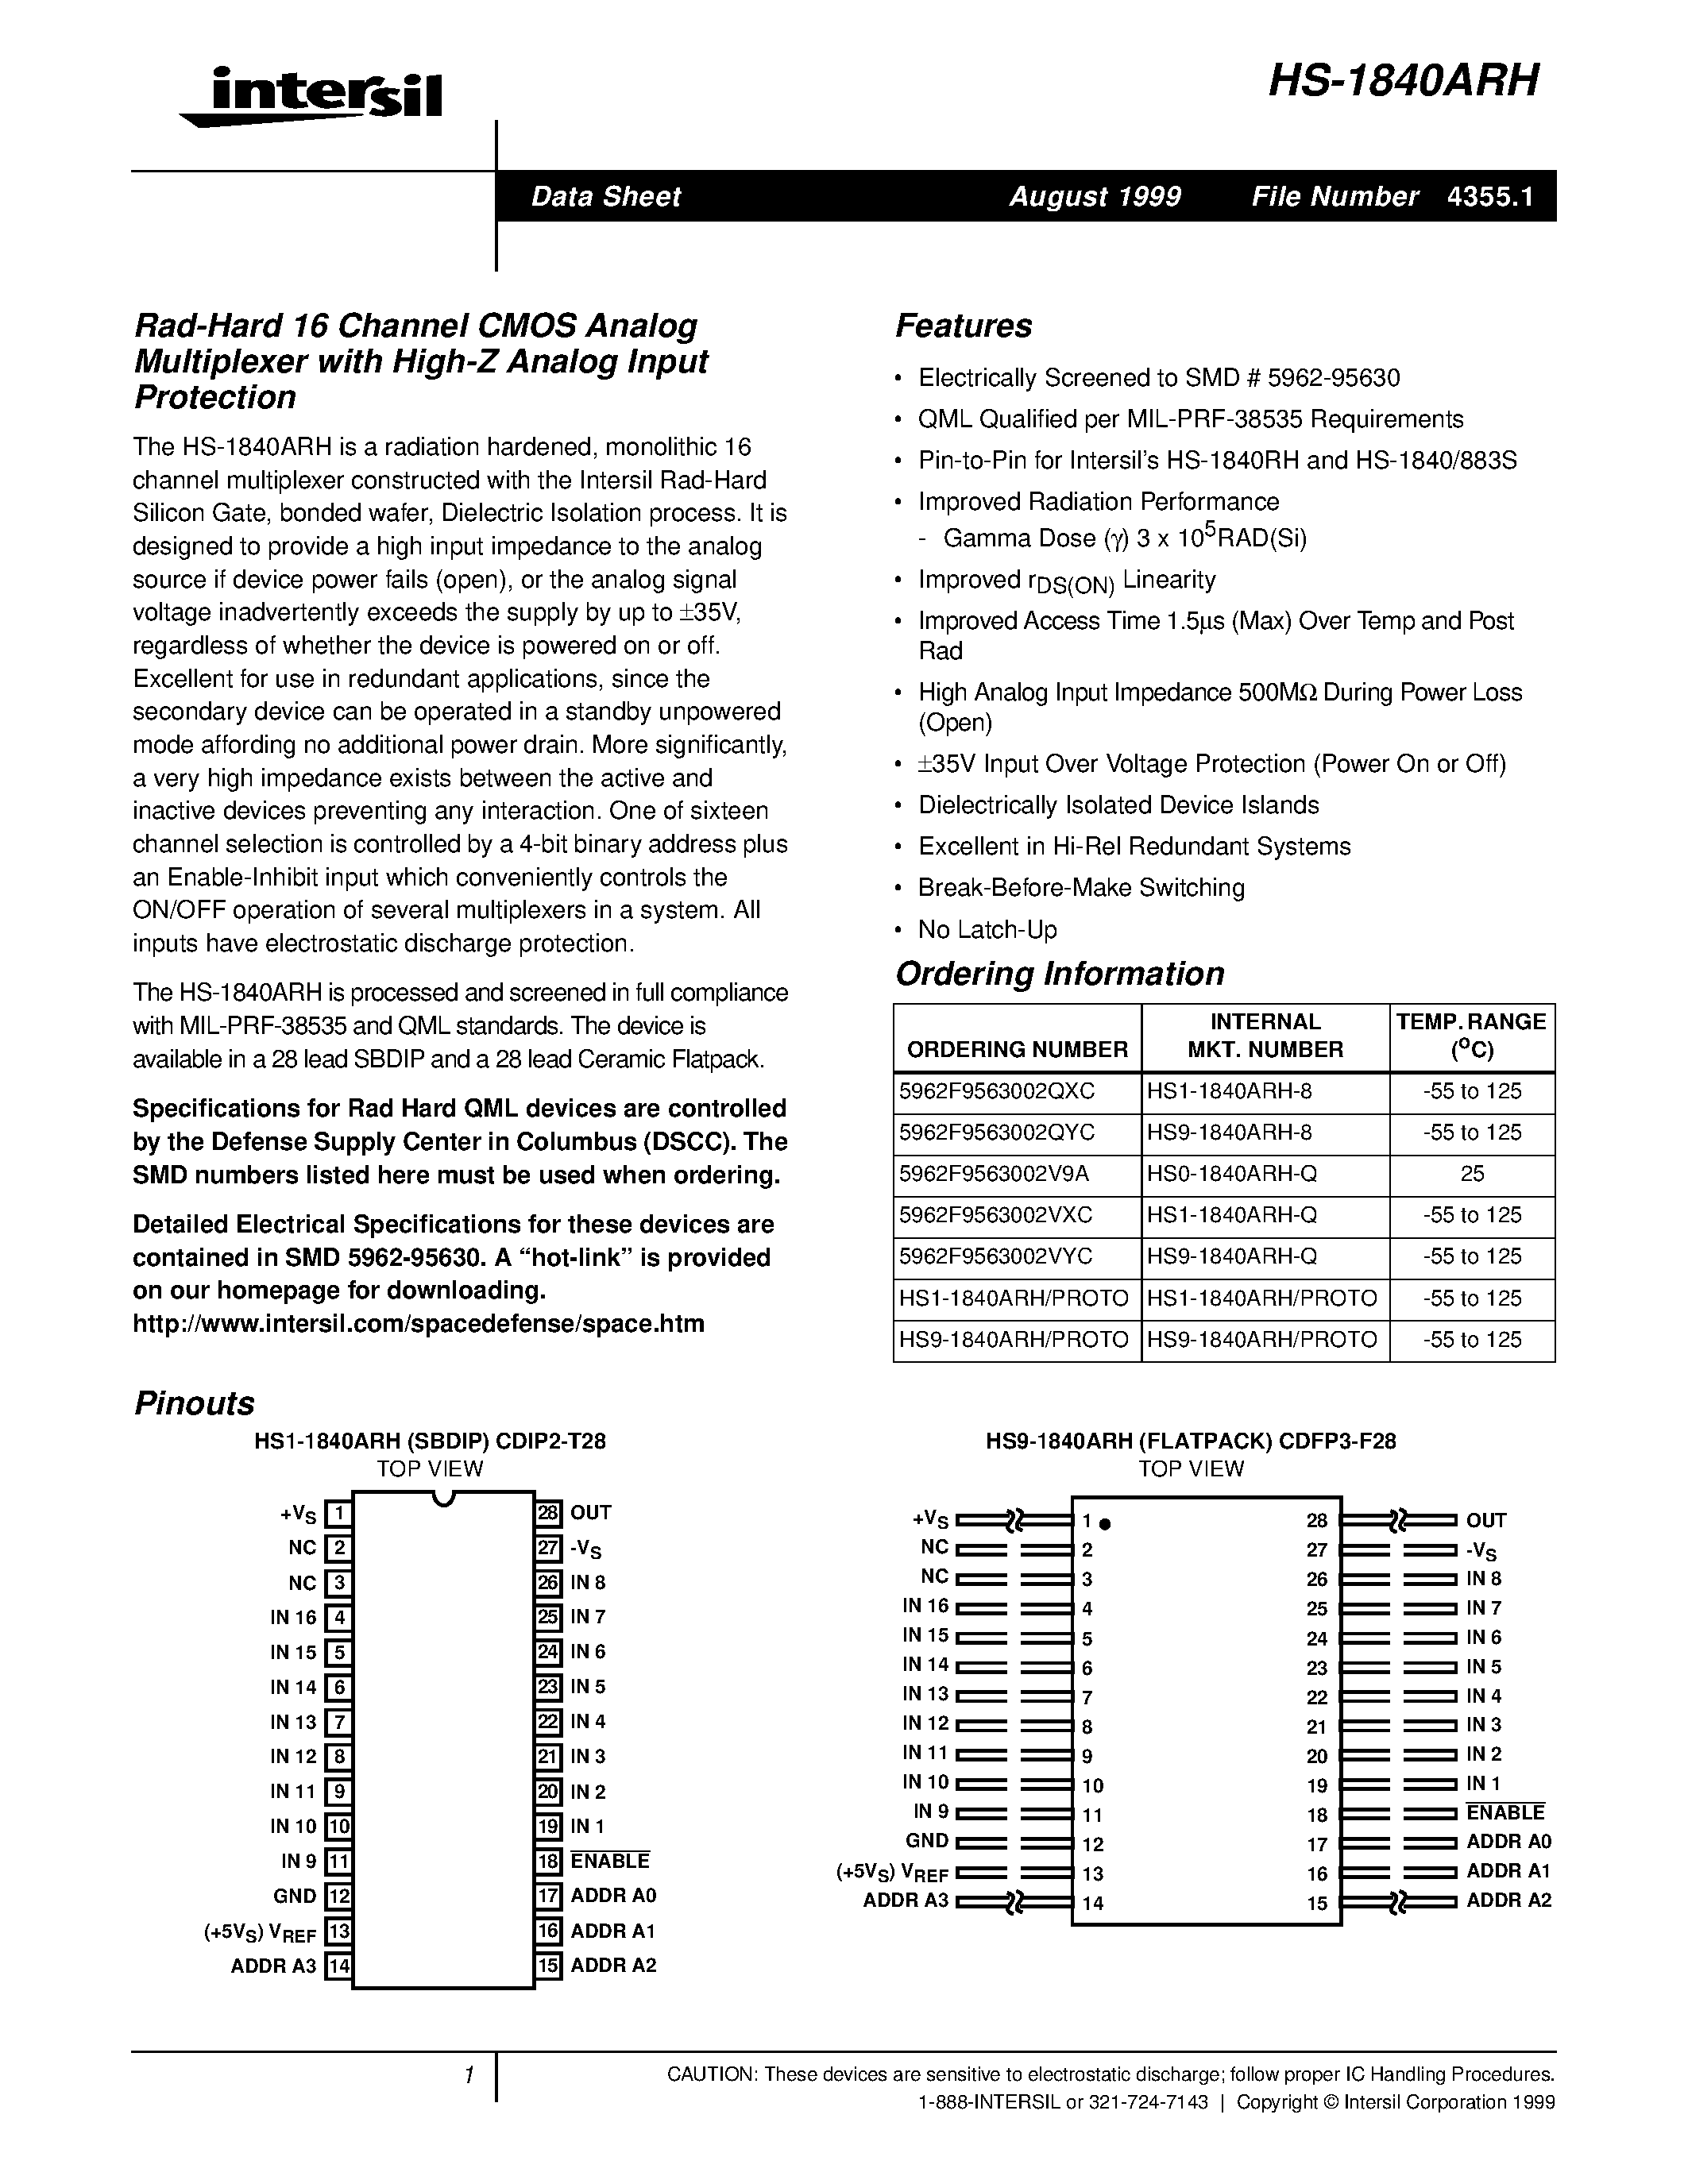 Datasheet 5962F9563002VYC - Rad-Hard 16 Channel CMOS Analog Multiplexer with High-Z Analog Input Protection page 1